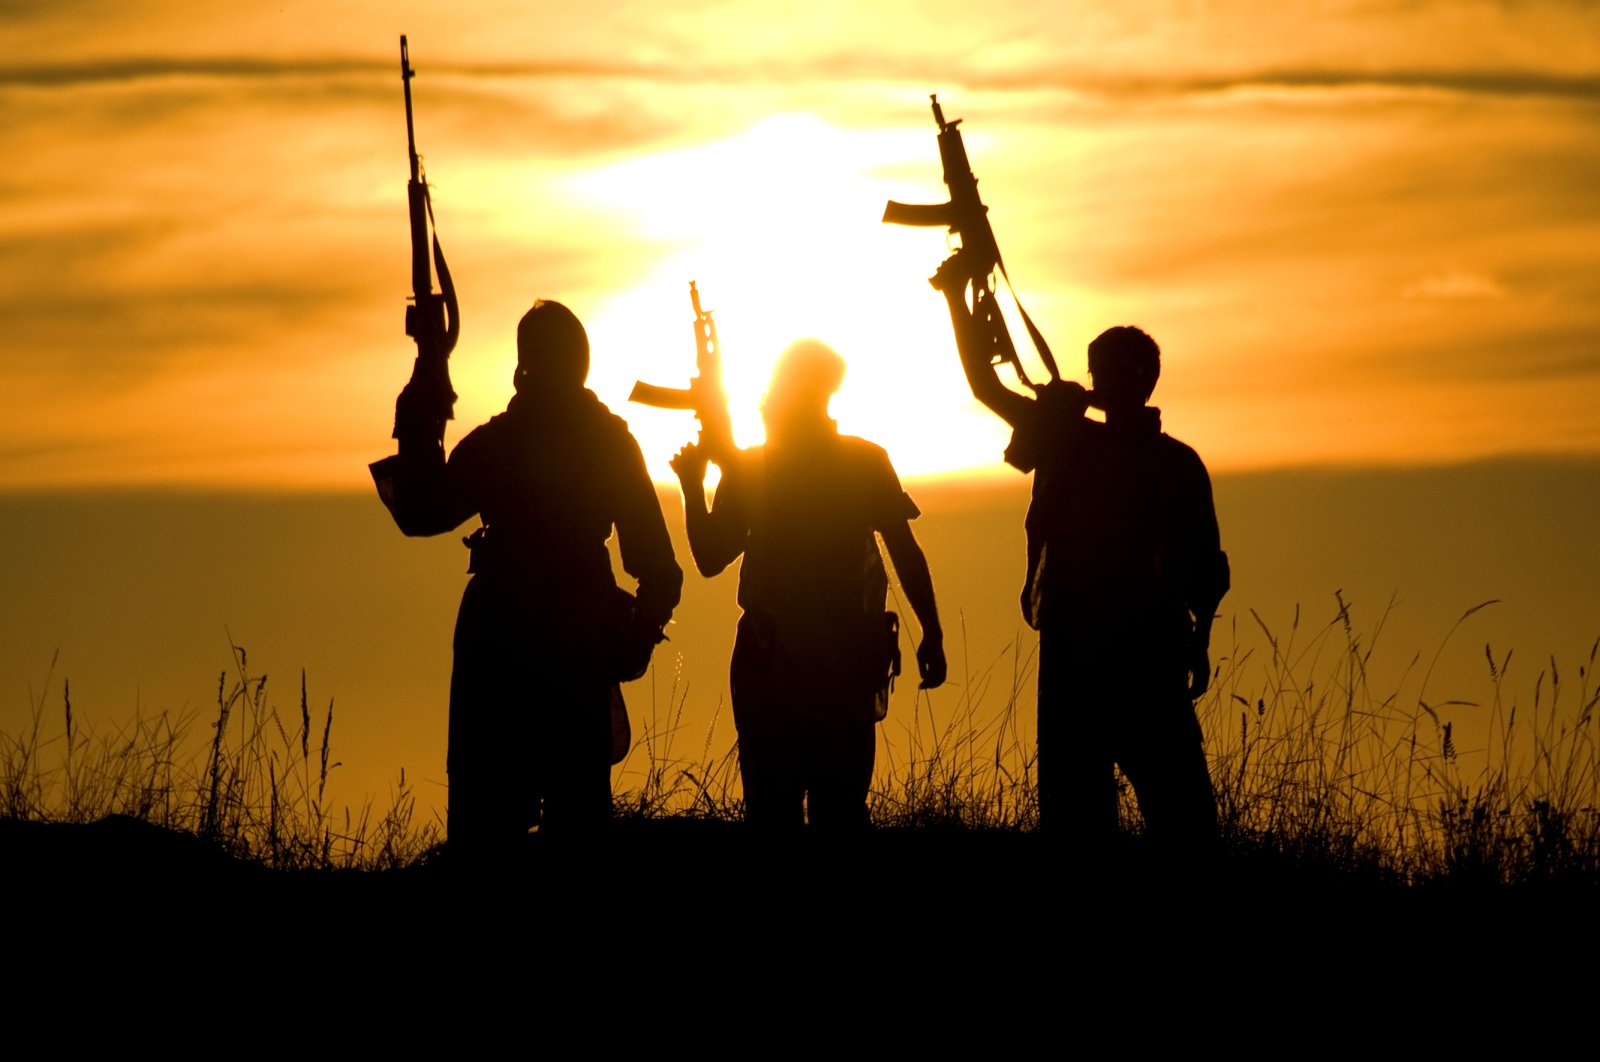 An illustration of silhouettes of several terrorists in a reference to the PKK terrorists. (Photo by Shutterstock)